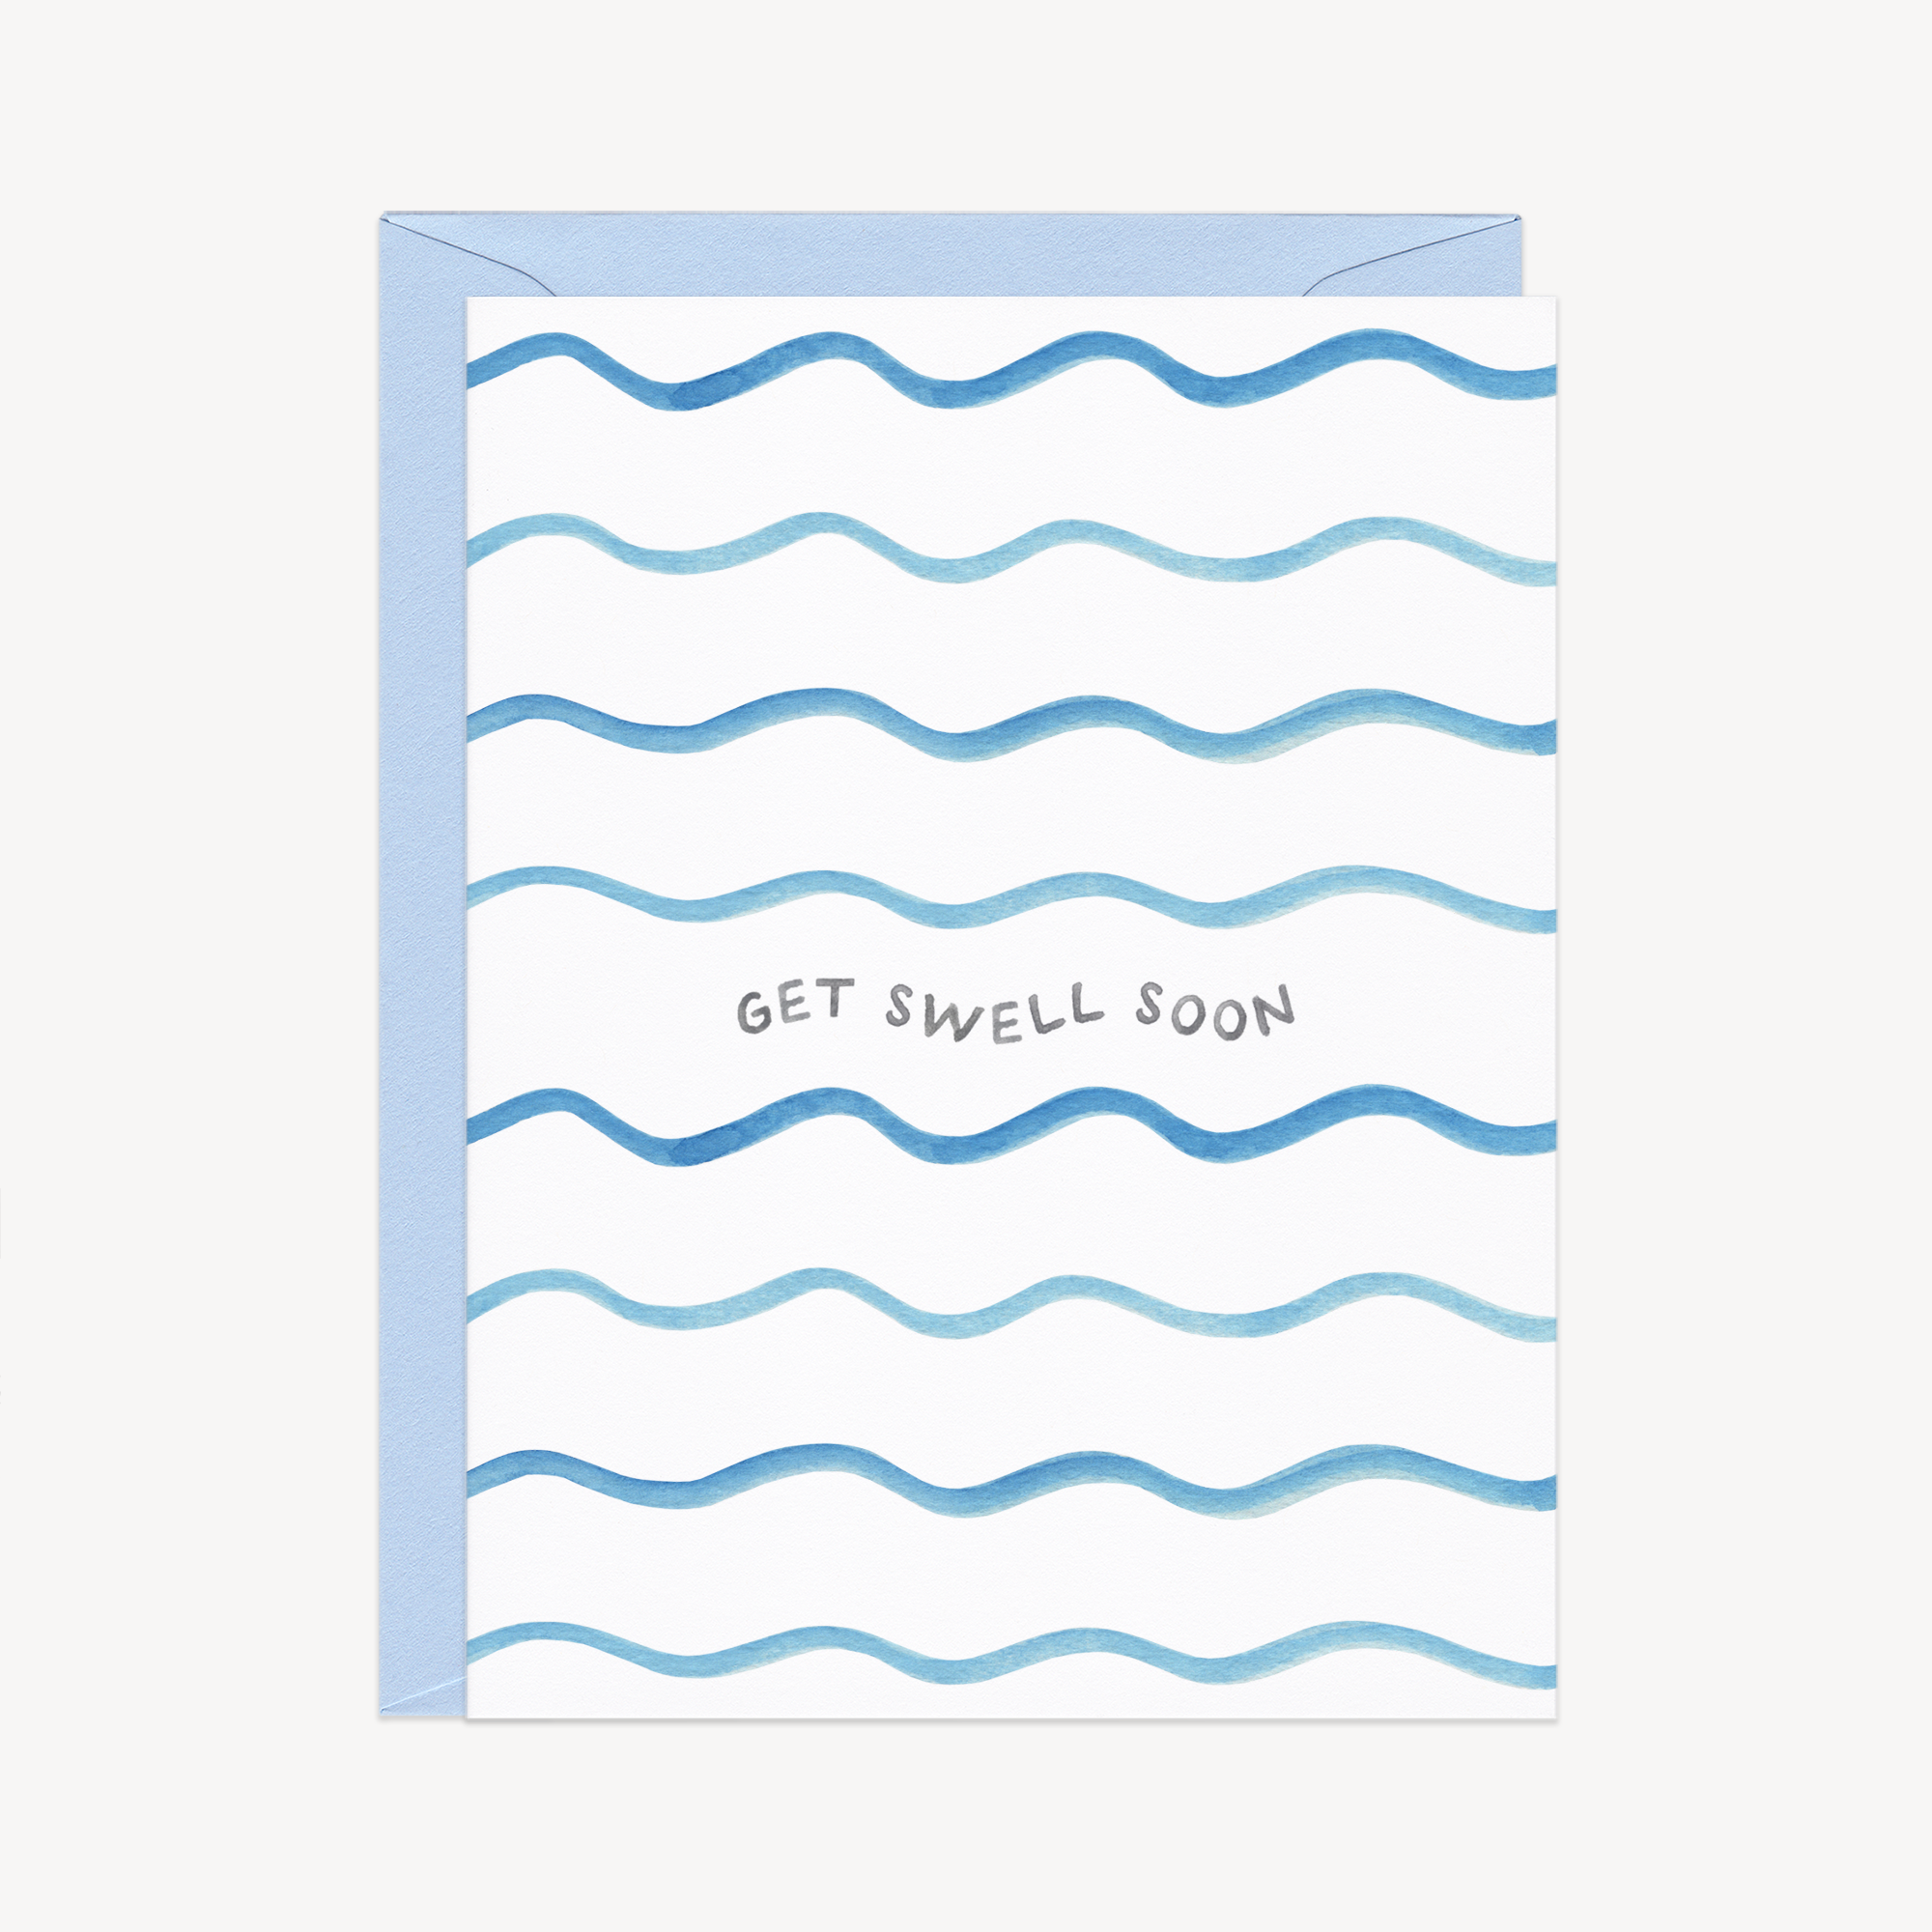 Get Swell Soon Sympathy / Support Card